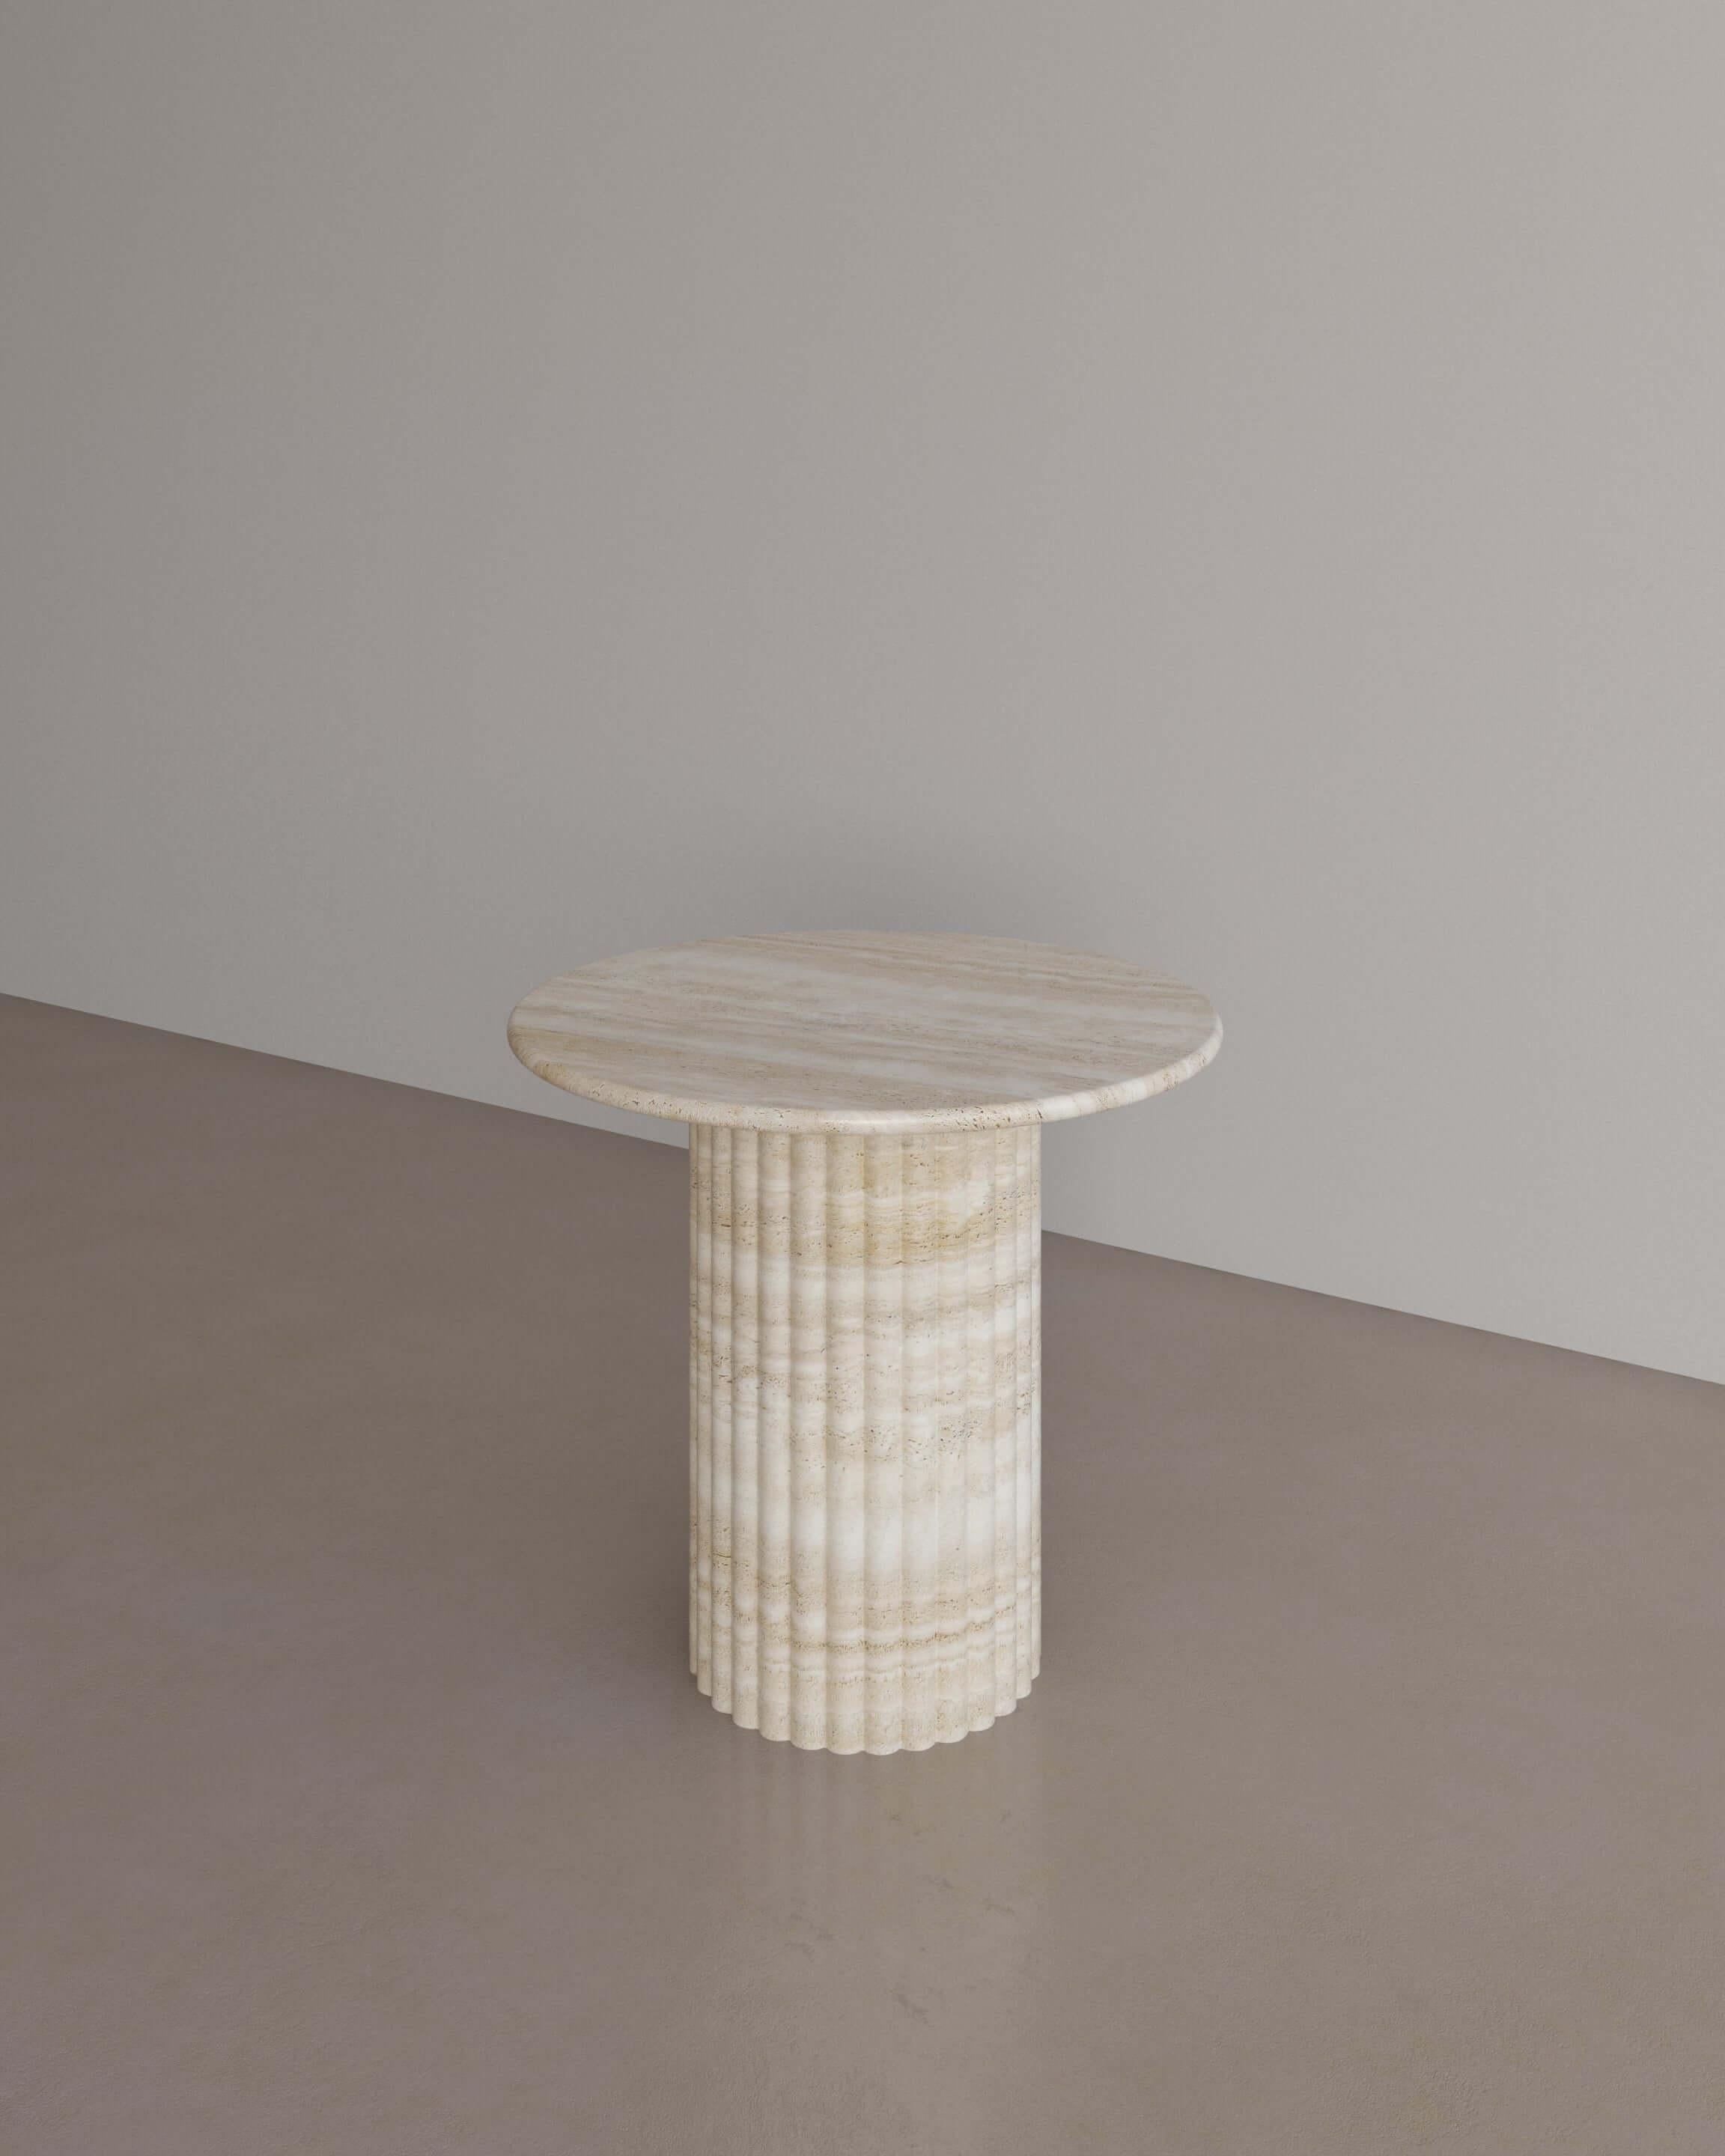 The Antica Occasional table in Nude Travertine by The Essentialist displays a perfect synergy by viewing classical idealism through a modern lens. A traditional pillar supports a circular top with bullnose edges, crafted from whole natural